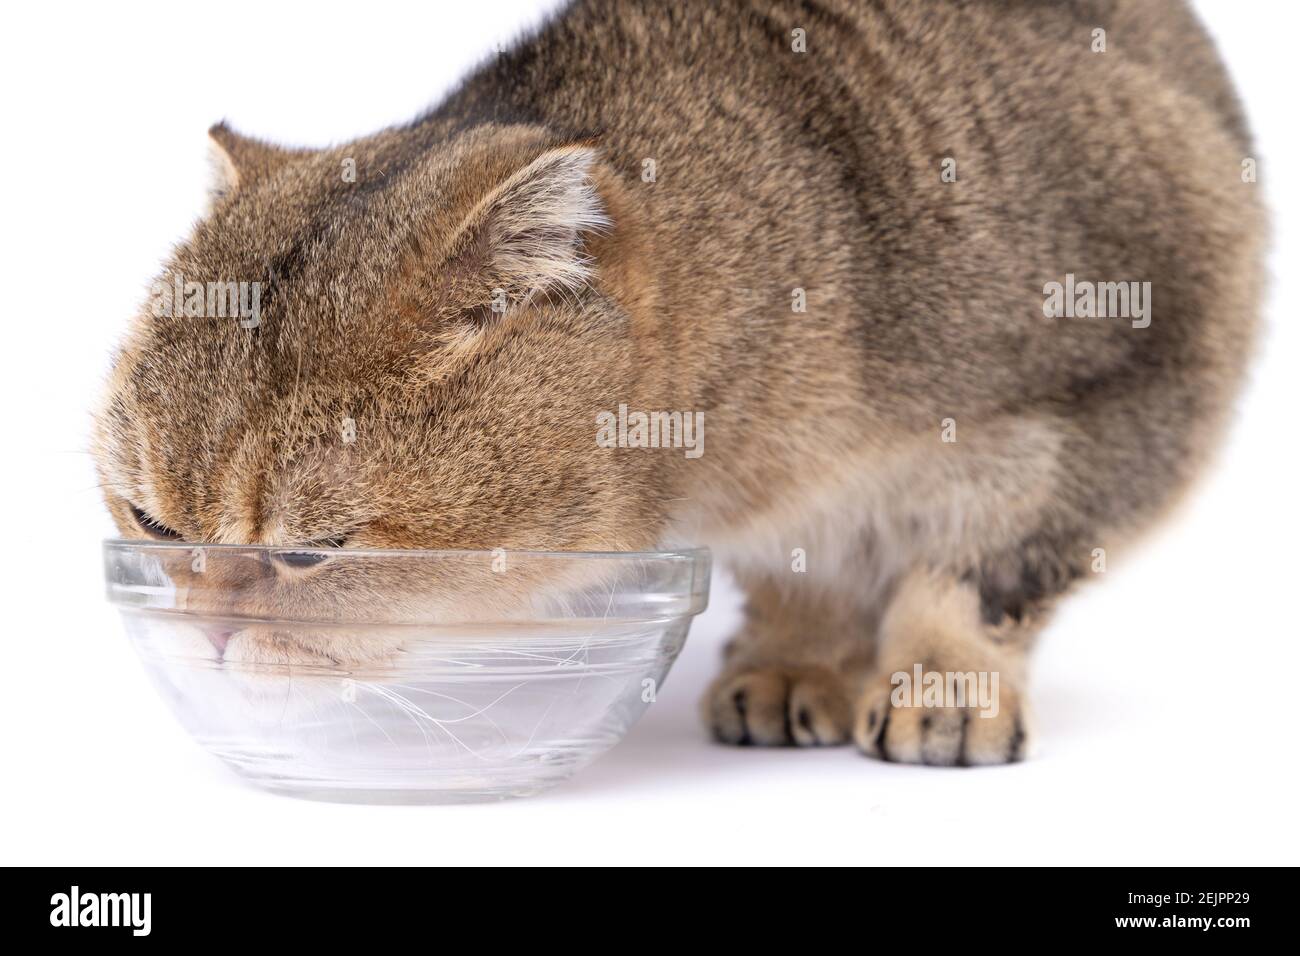 Golden scottish fold cat eating next to a glass bowl on a white background Stock Photo